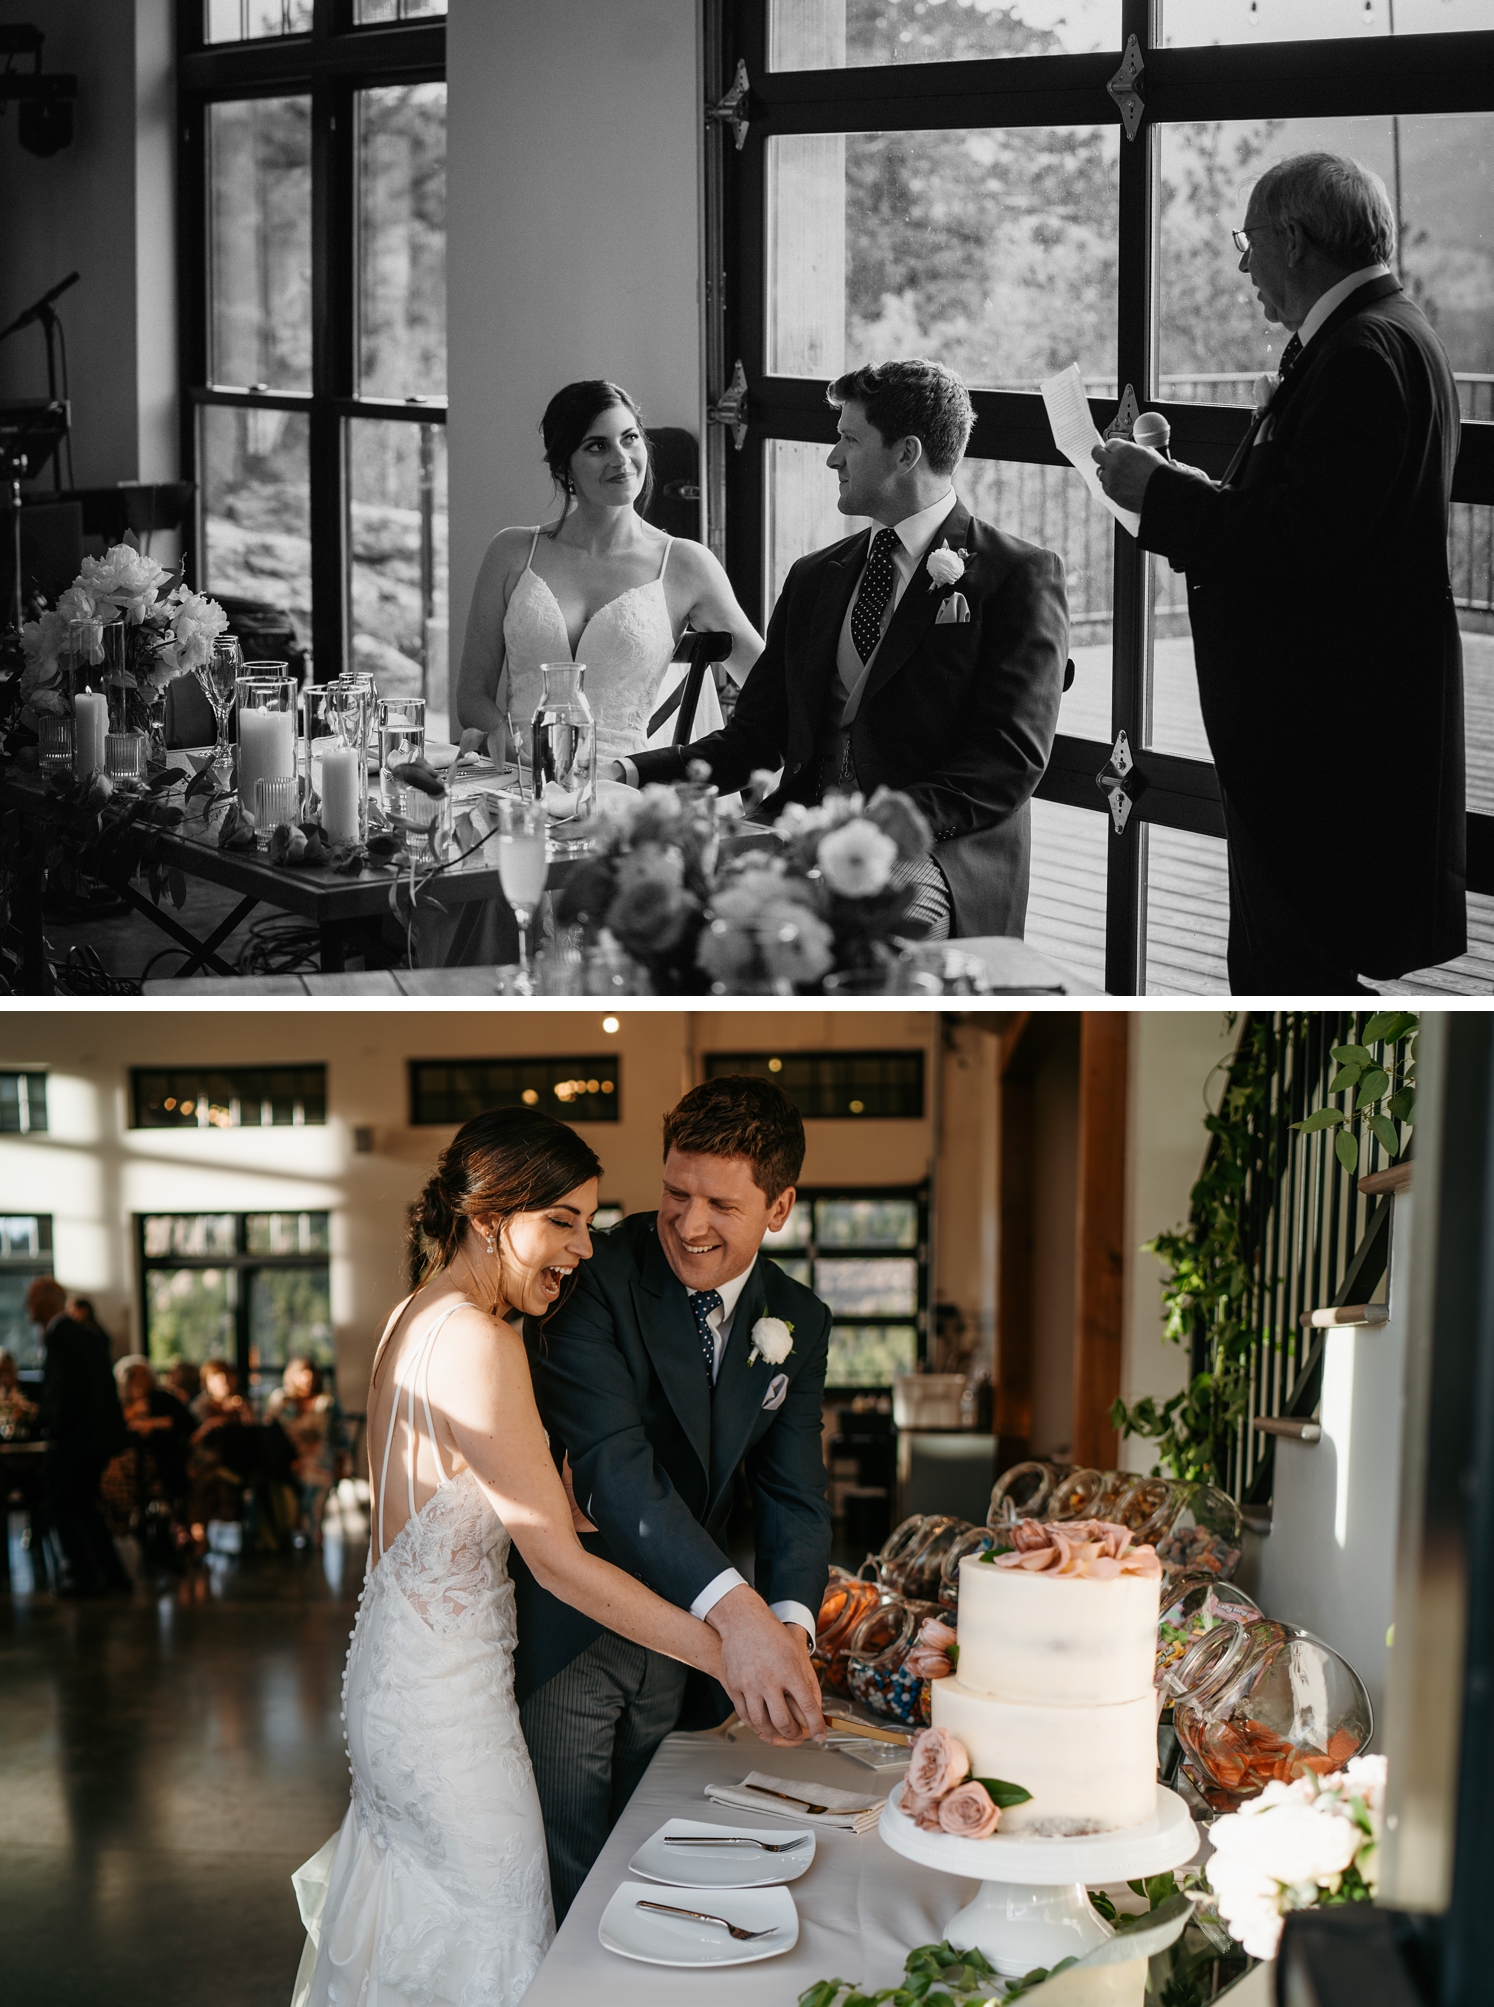 Bride looking at father during speech | bride and groom cutting cake at North Star Gatherings reception | McArthur Weddings and Events